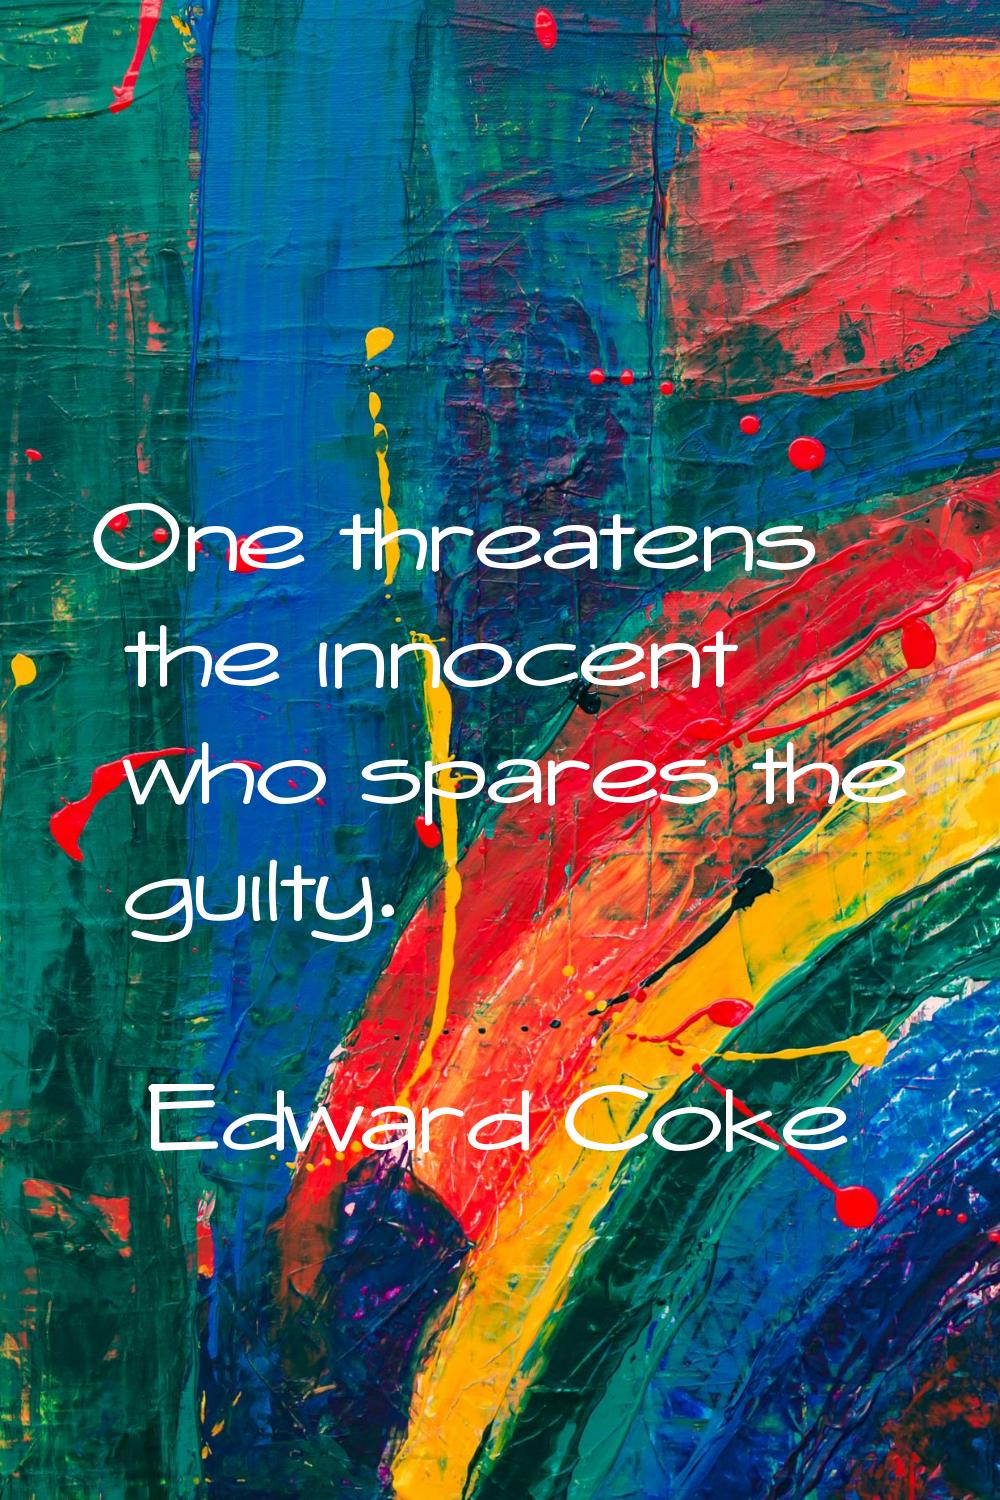 One threatens the innocent who spares the guilty.